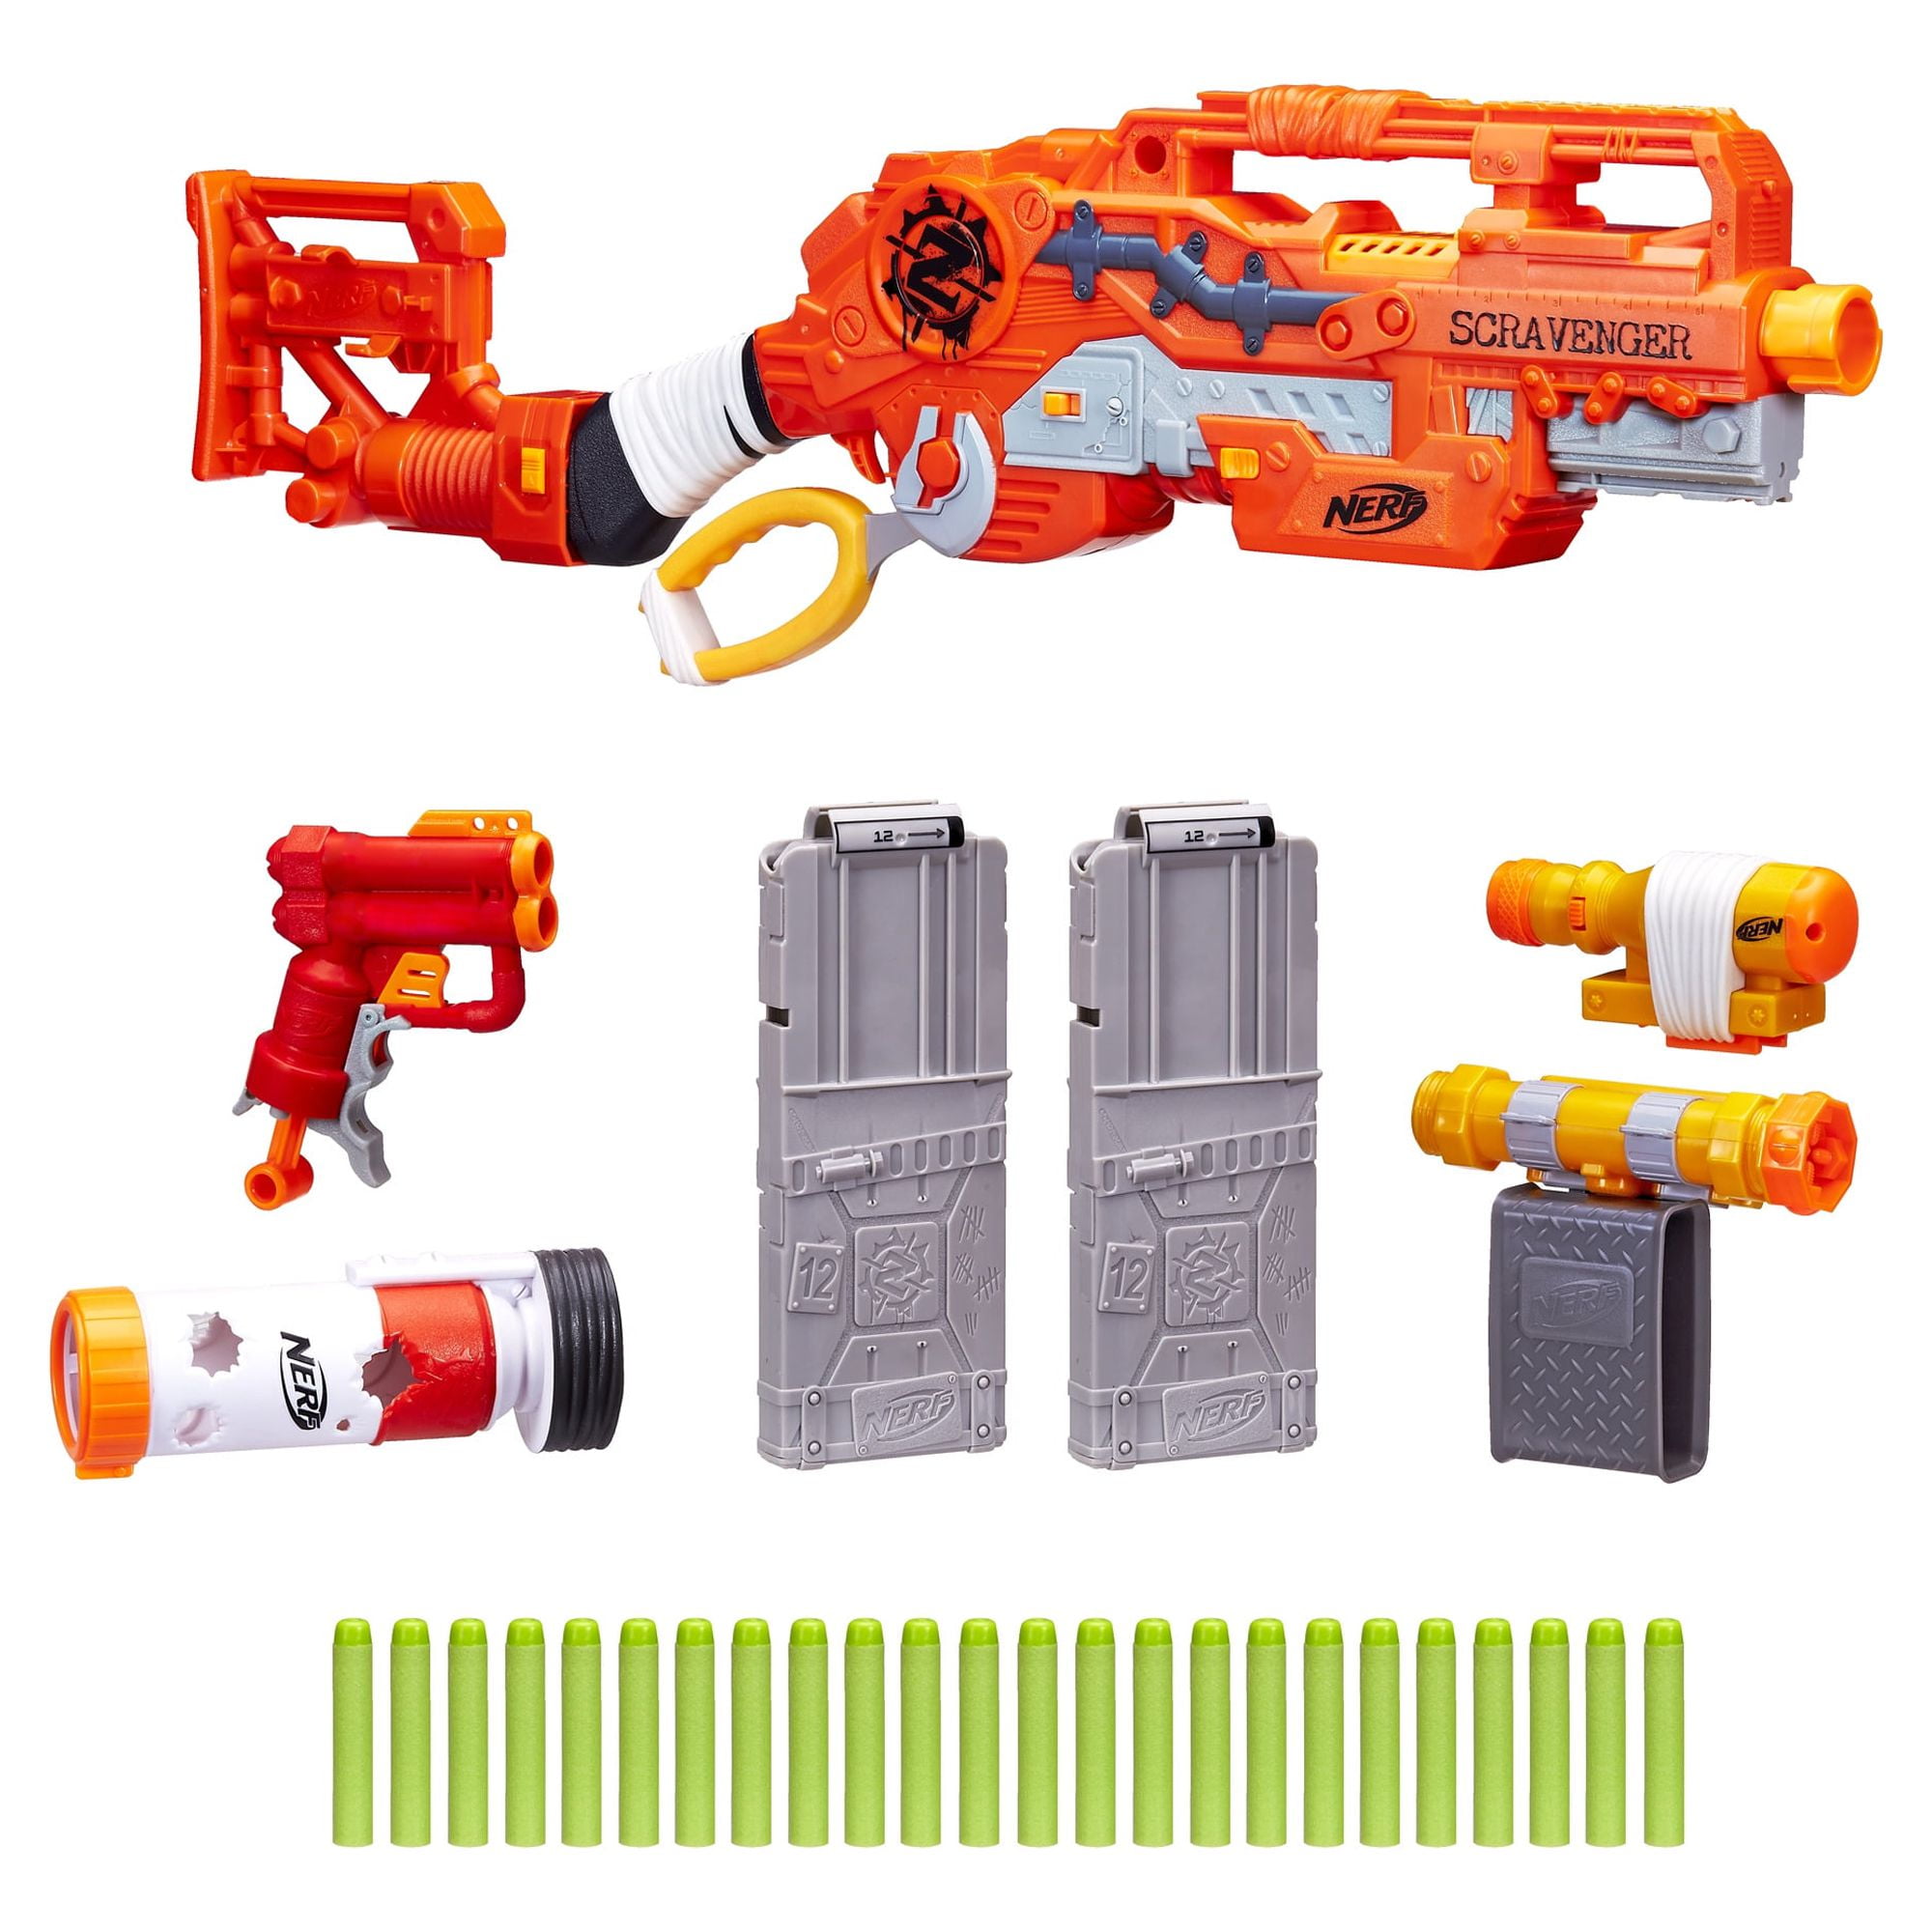 Fruit By The Foot, Barbie Florist Playset, Nerf Roblox Zombie Attack  Blaster & more (5/1) - Frugal Living NW